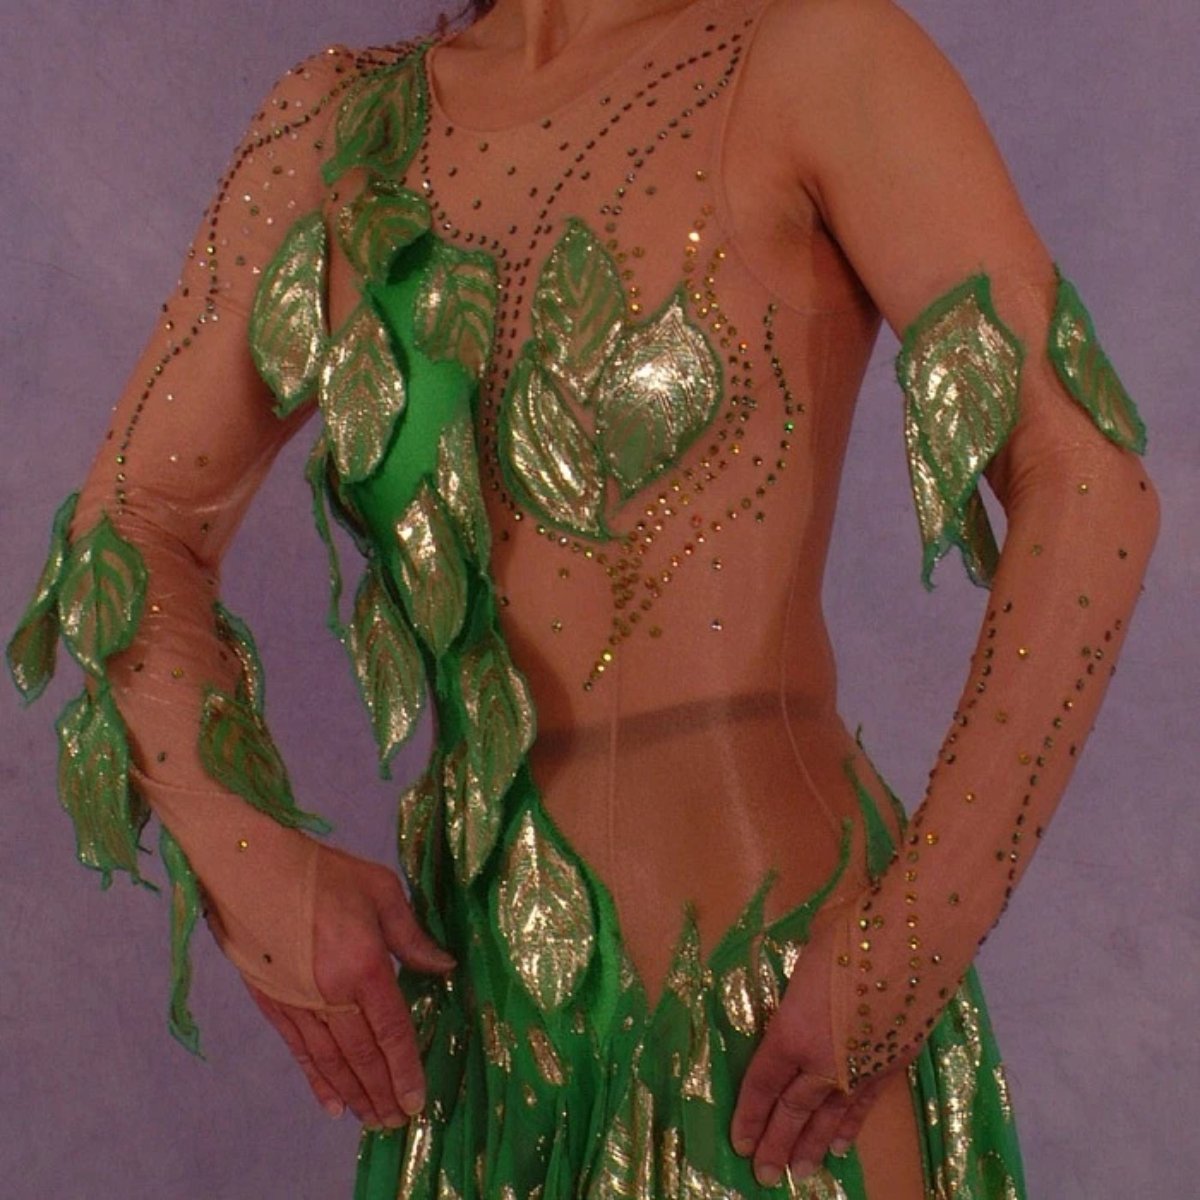 upper front view of Green Latin/rhythm dance dress was created on nude illusion base with green & gold metallic print chiffon… leaves hand cut & edged to embellish bodice, Swarovski rhinestones are trickled throughout in Vitrail medium(shines different shades of green & gold) 